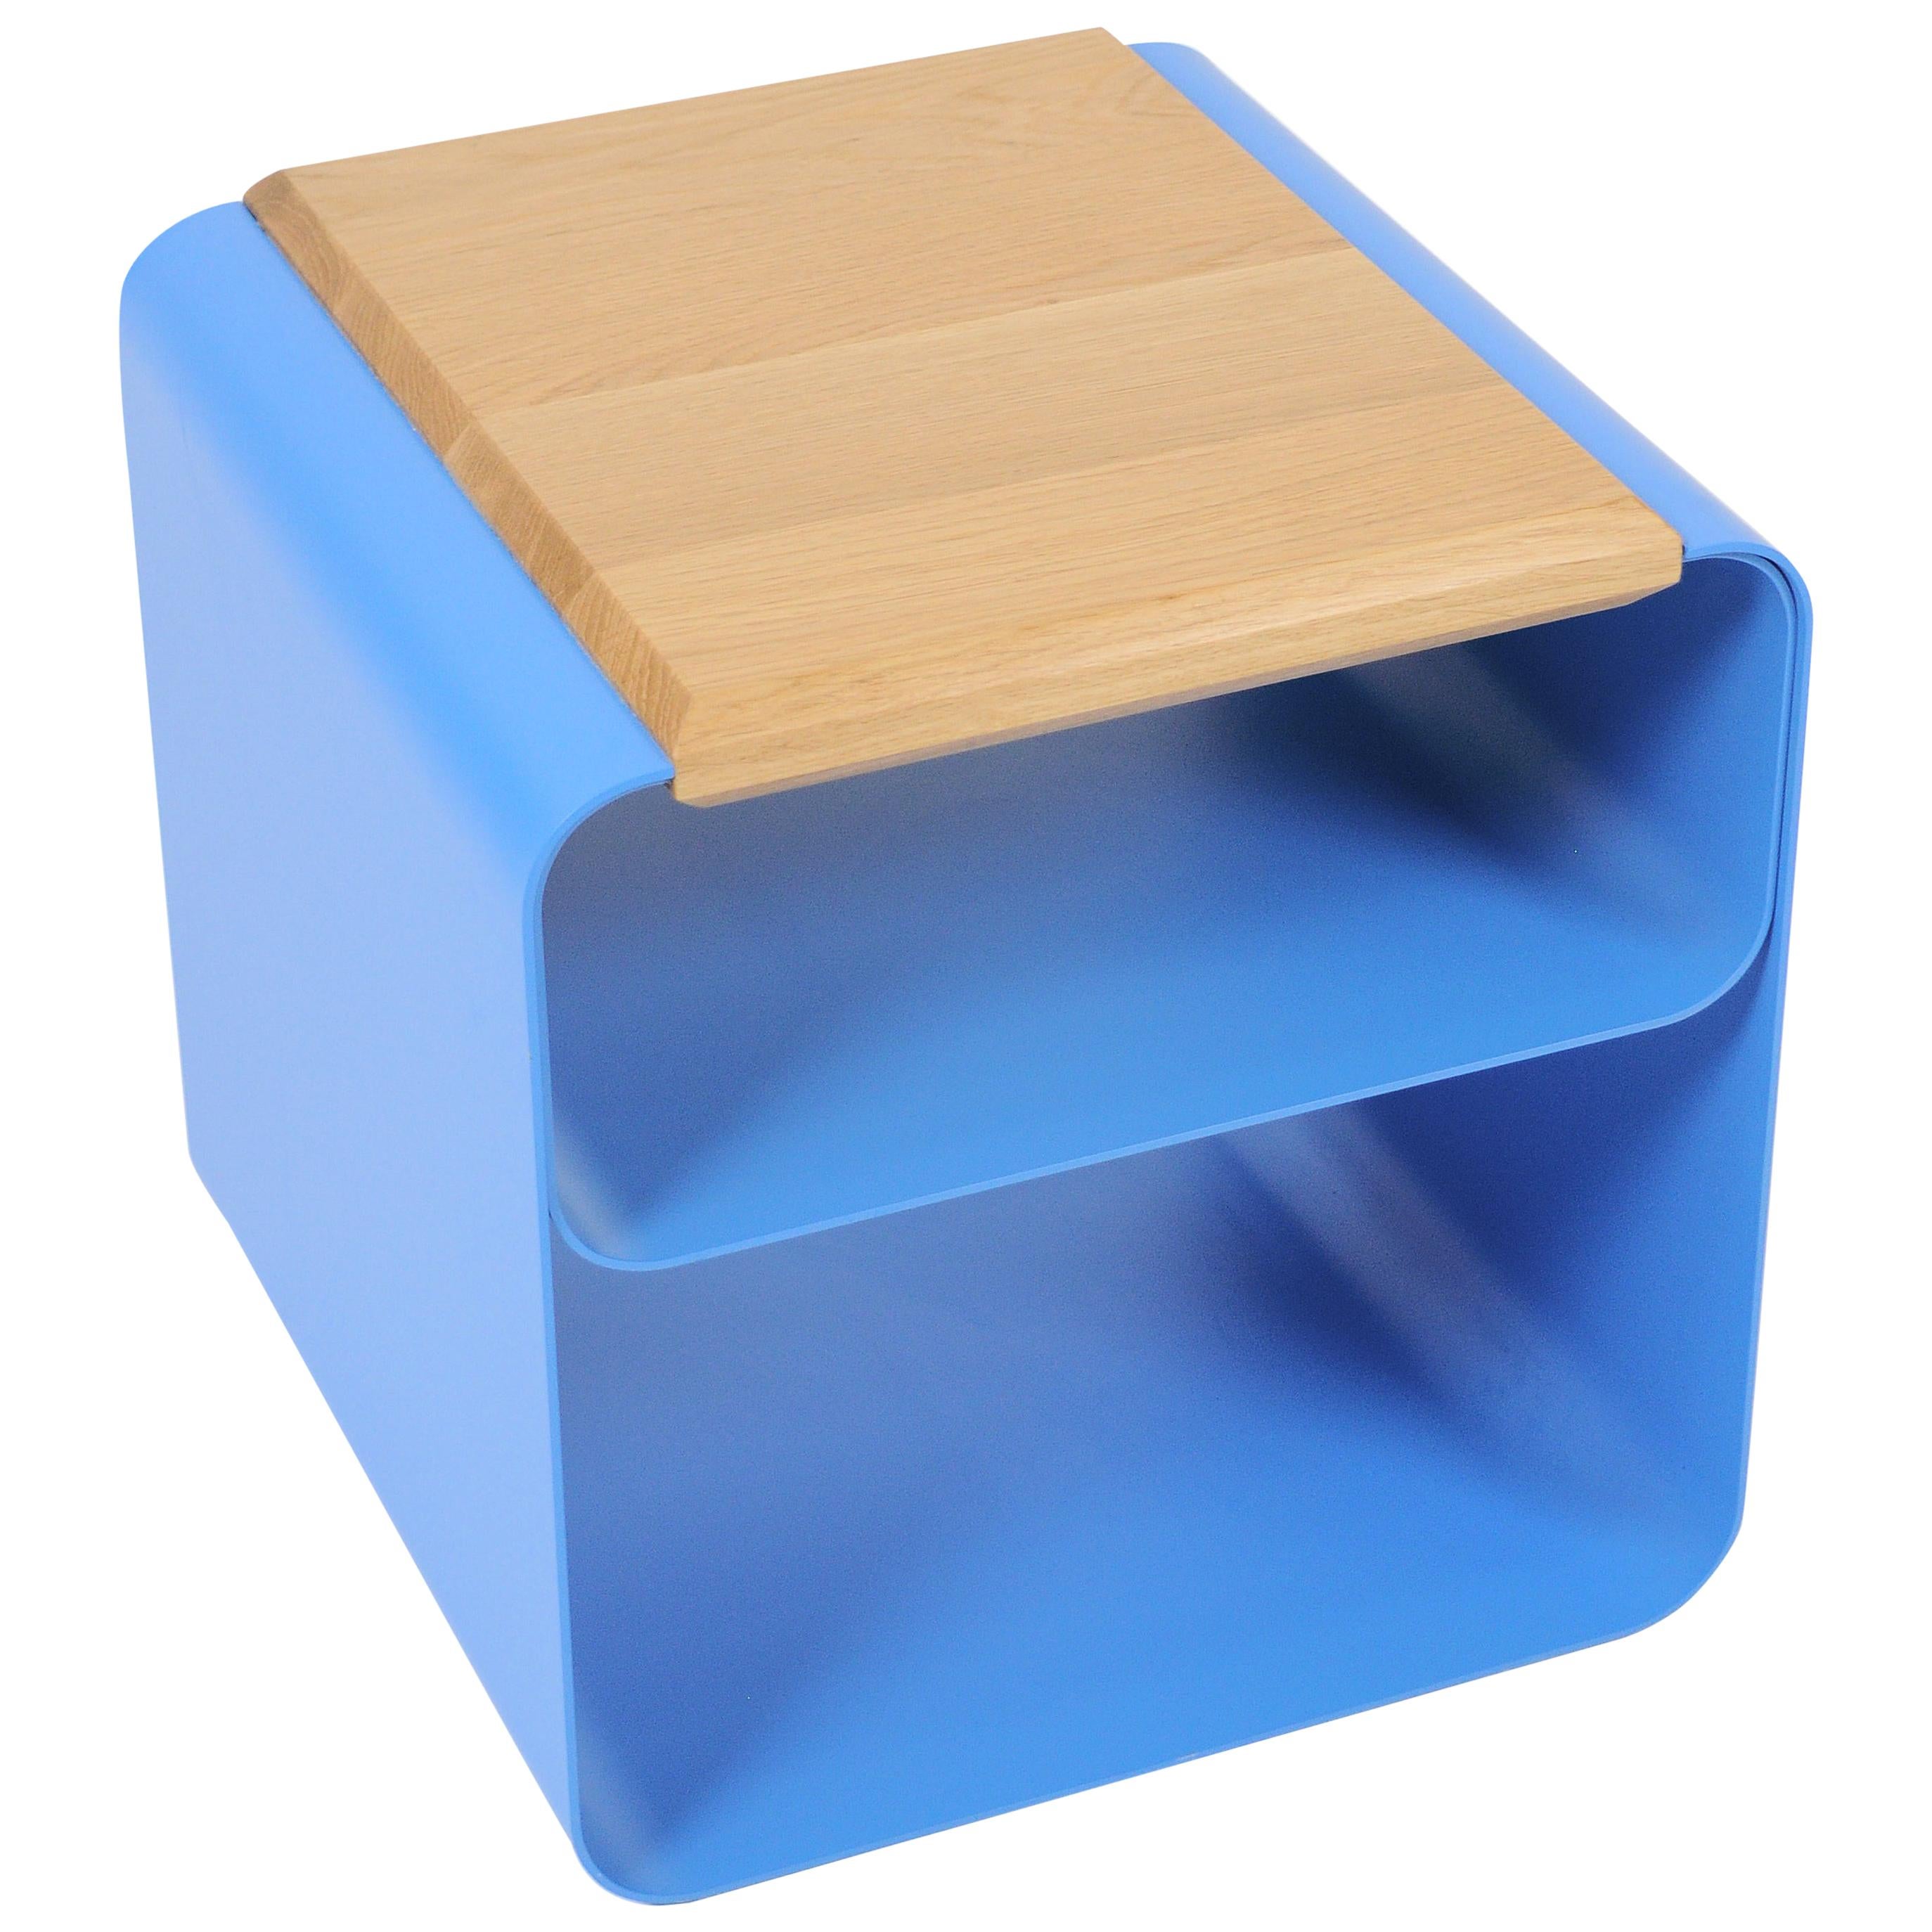 Bedside Table or Stool or Open Container in Shaped Sheet